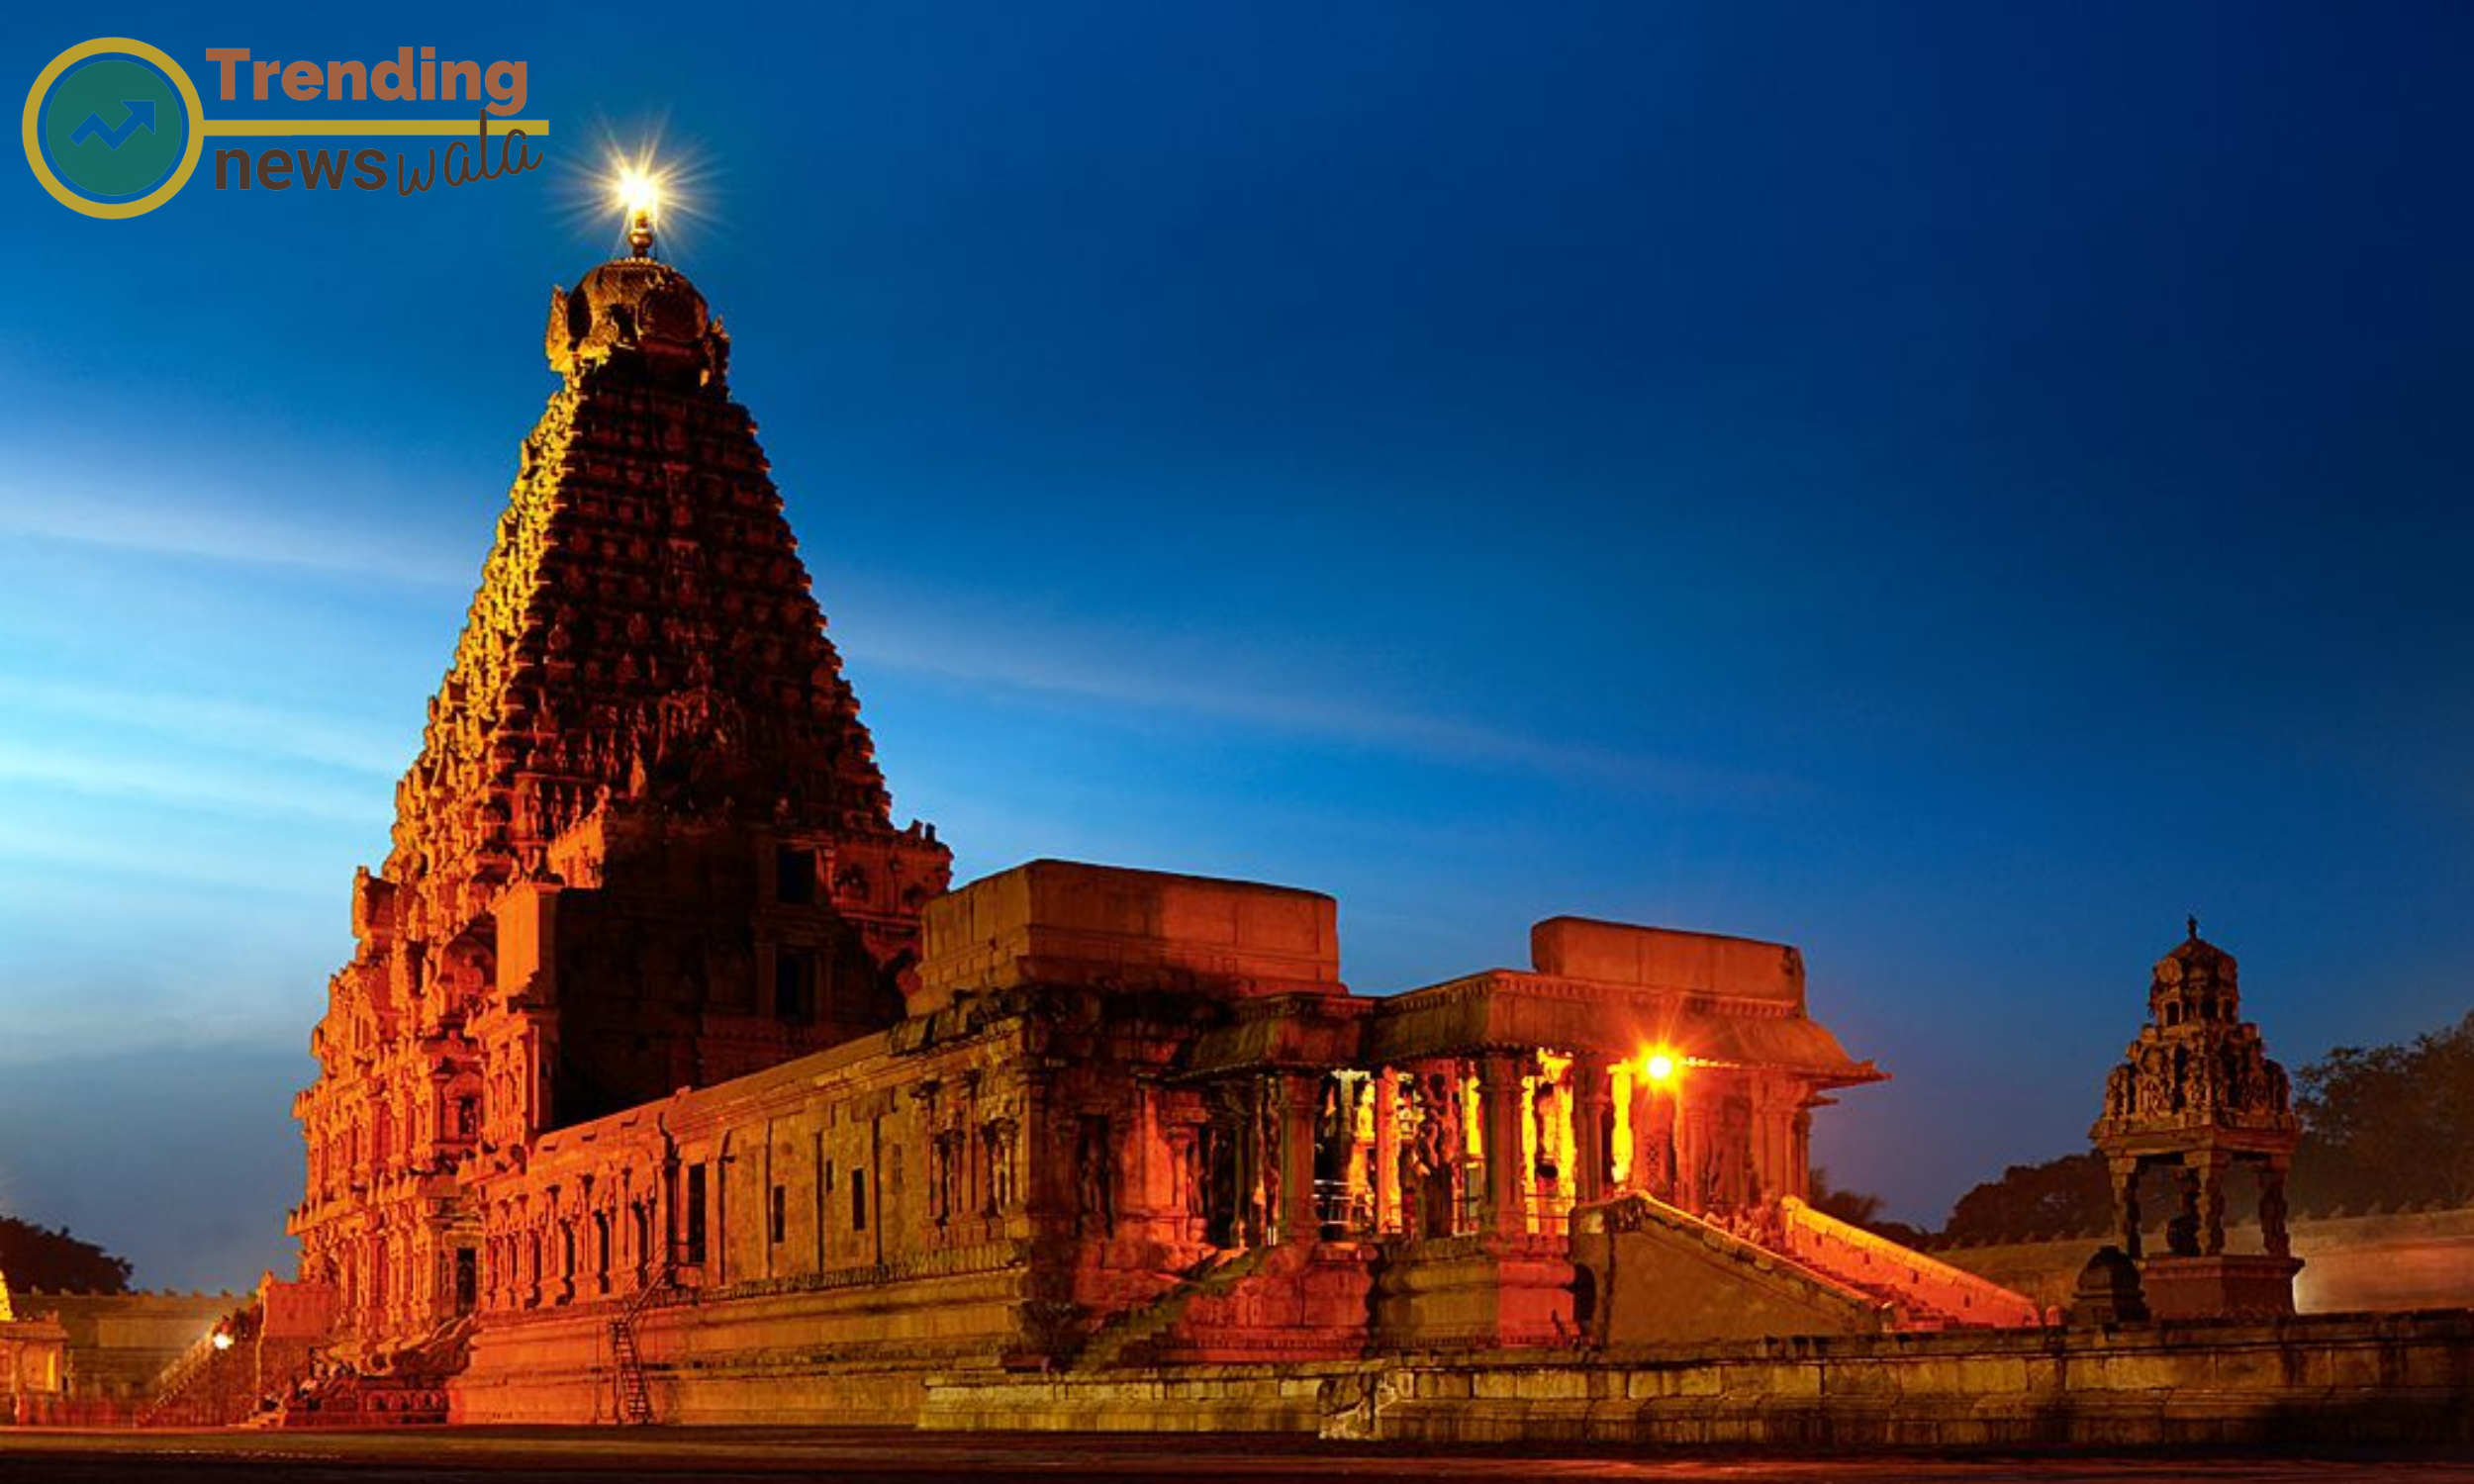 Apart from its architectural and artistic significance, the Brihadeeswara Temple 